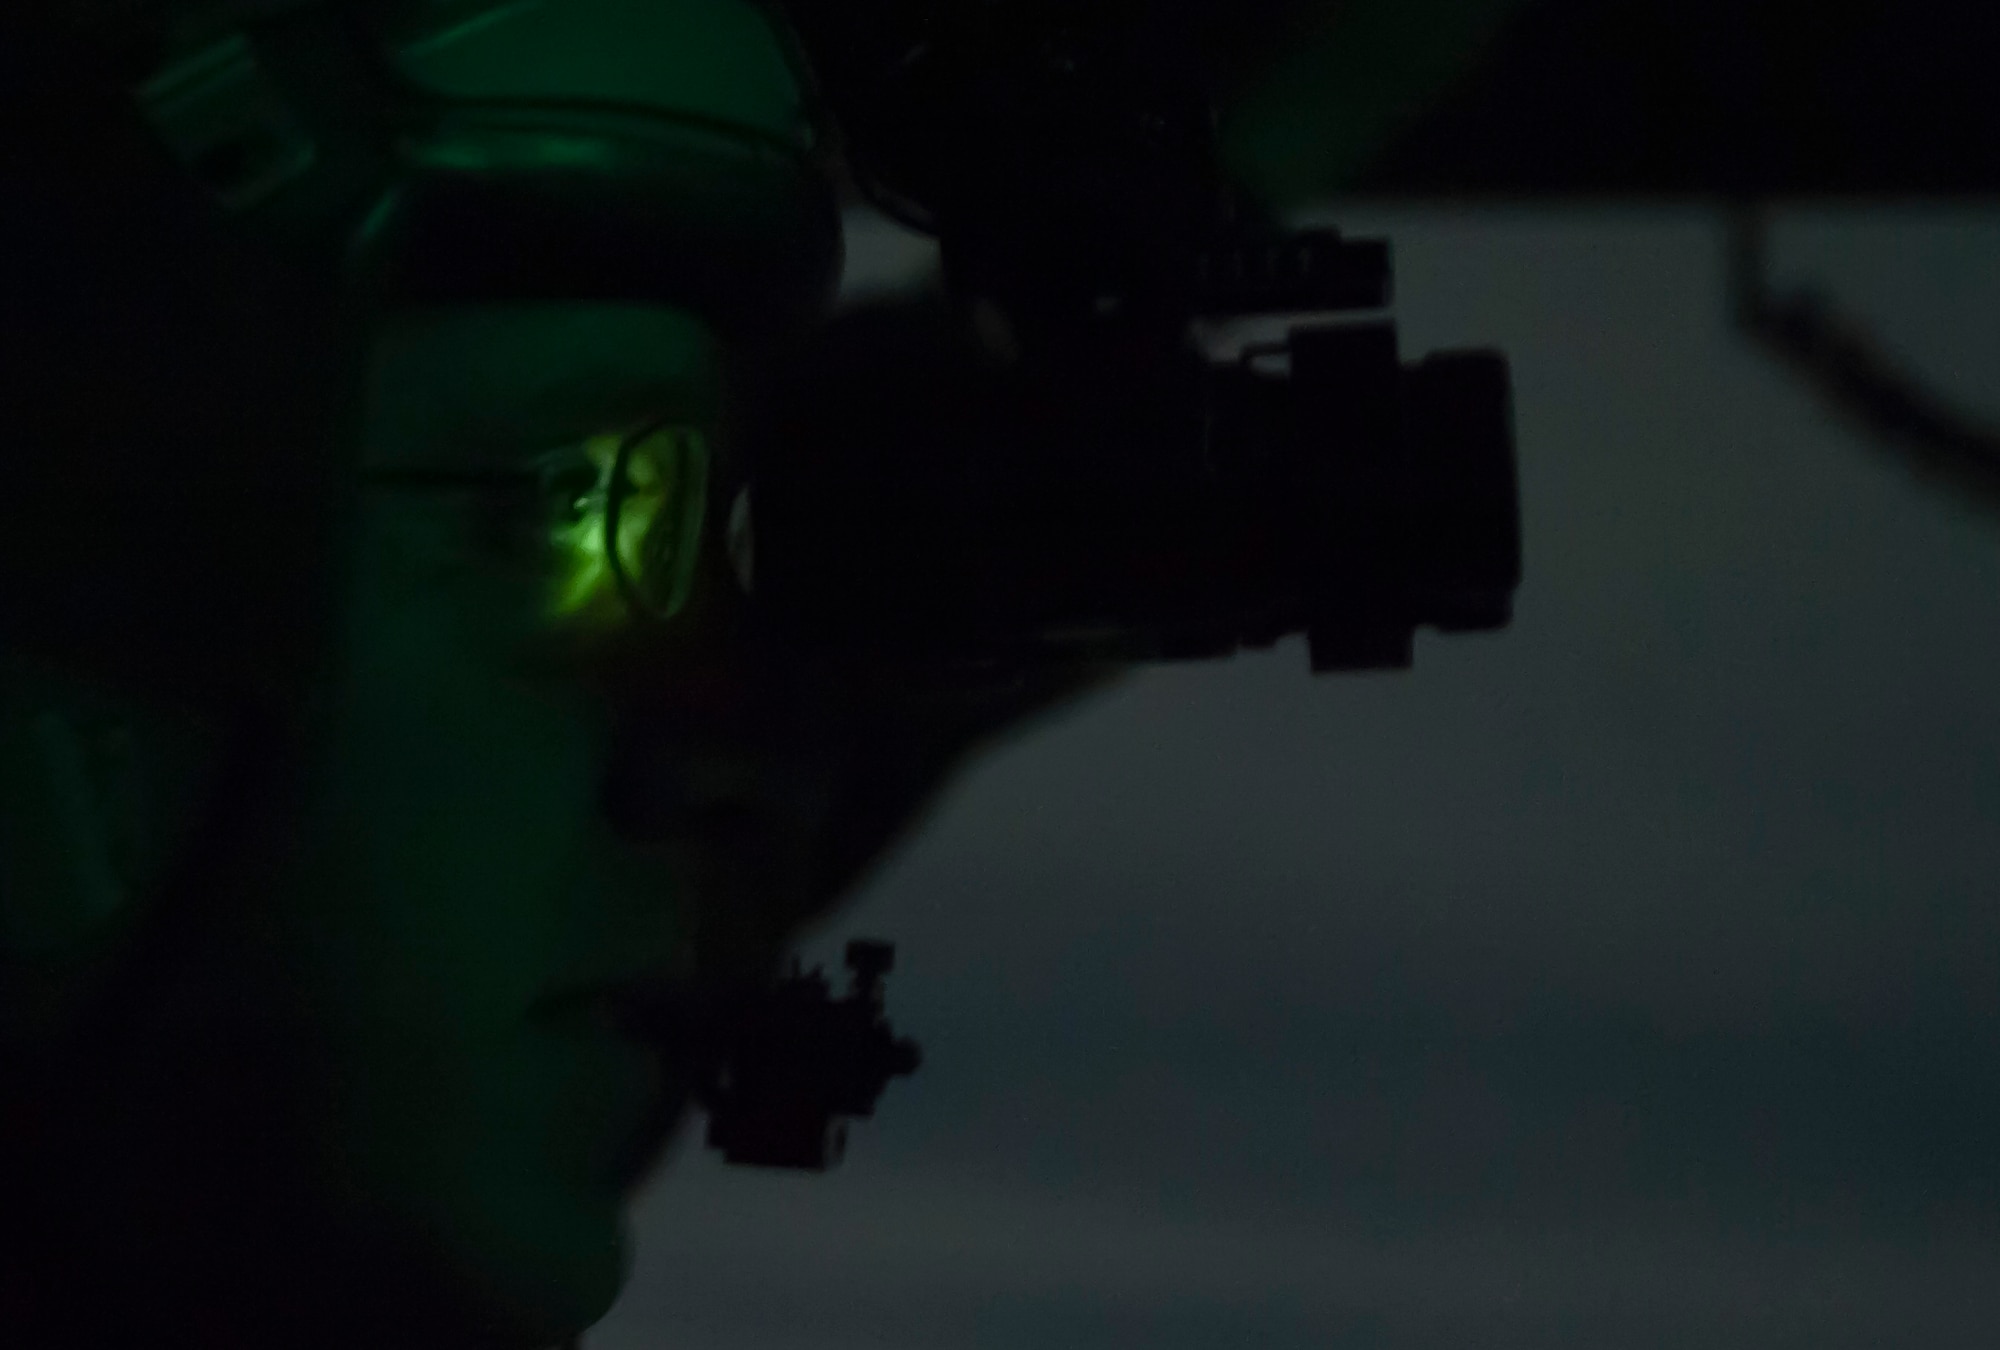 Capt. Dan “Filter” Naske, 57th Weapons Squadron pilot, uses night vision goggles to see while flying in a C-17 Globemaster III over the Nevada Test and Training Range on Dec. 10, 2016. The C-17 is operated by Air Mobility Command located at Travis Air Force Base, Calif.; Dover Air Force Base, Del.; Joint Base Lewis-McChord, Wash.; Joint Base Charleston, S.C., and Joint Base McGuire-Dix-Lakehurst, N.J. (U.S. Air Force photo by Airman 1st Class Kevin Tanenbaum)